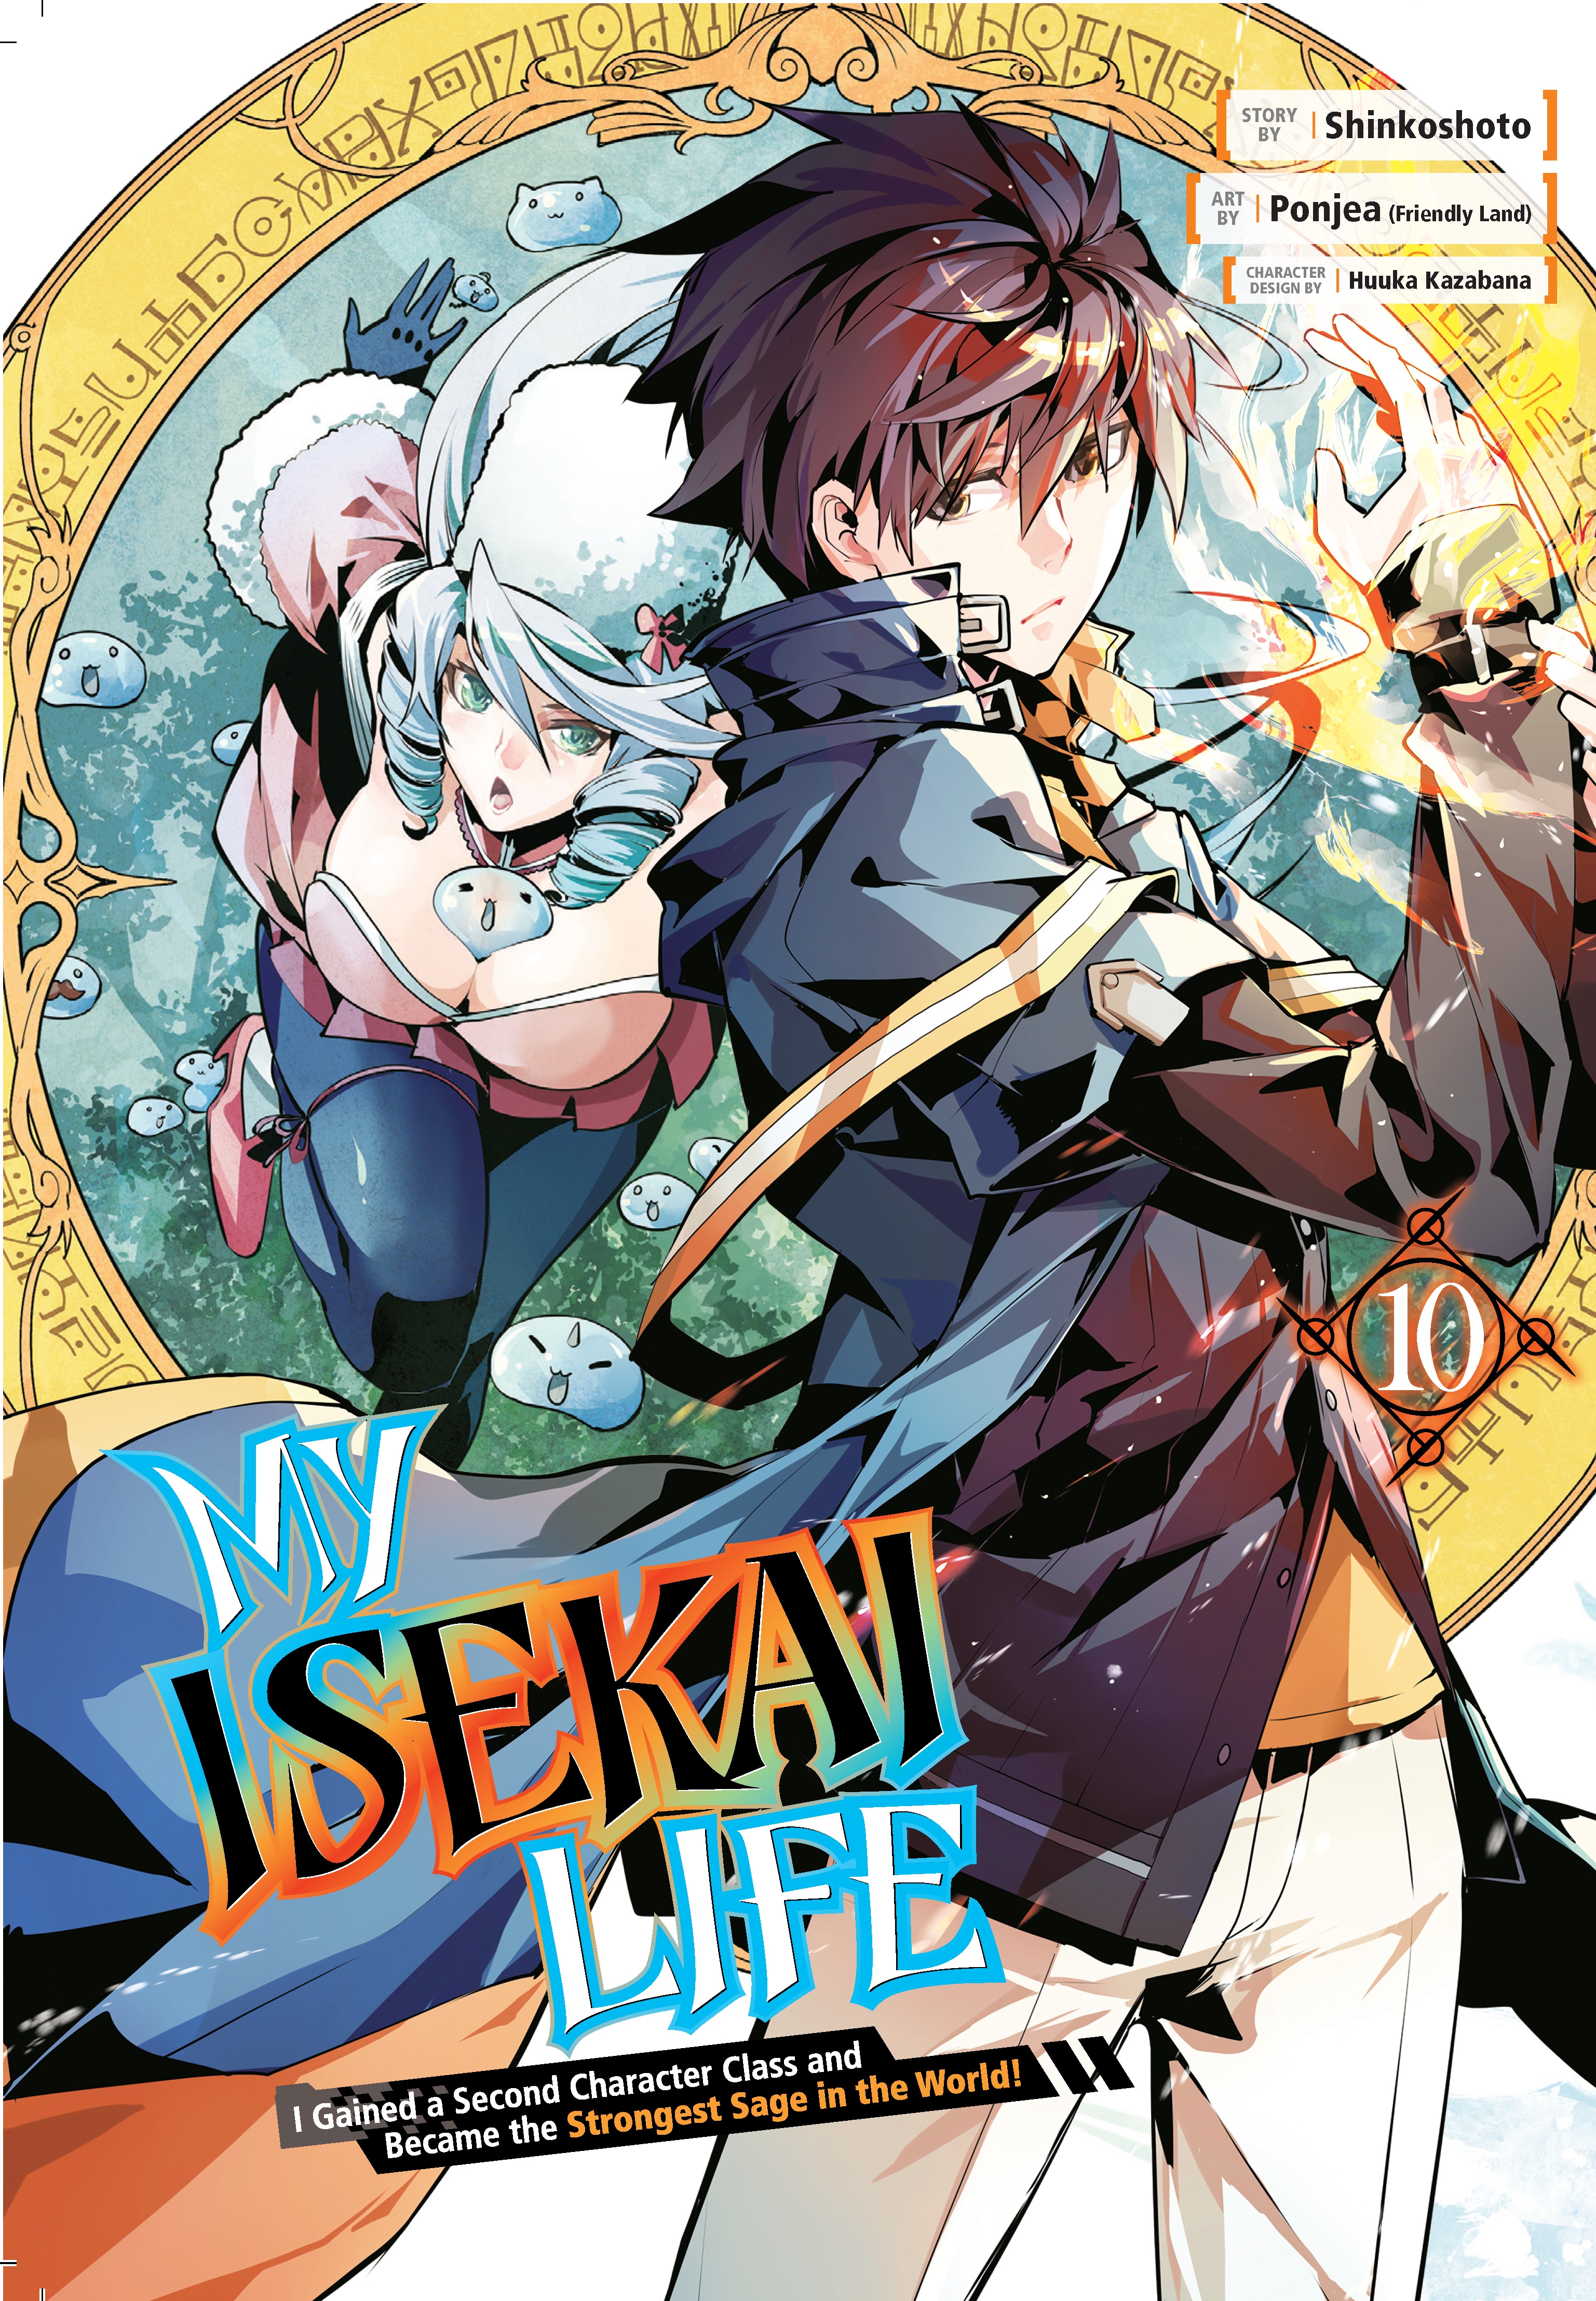 Sentai Filmworks Announces My Isekai Life: I Gained a Second Character  Class and Became the Strongest Sage in the World! Anime - Crunchyroll News